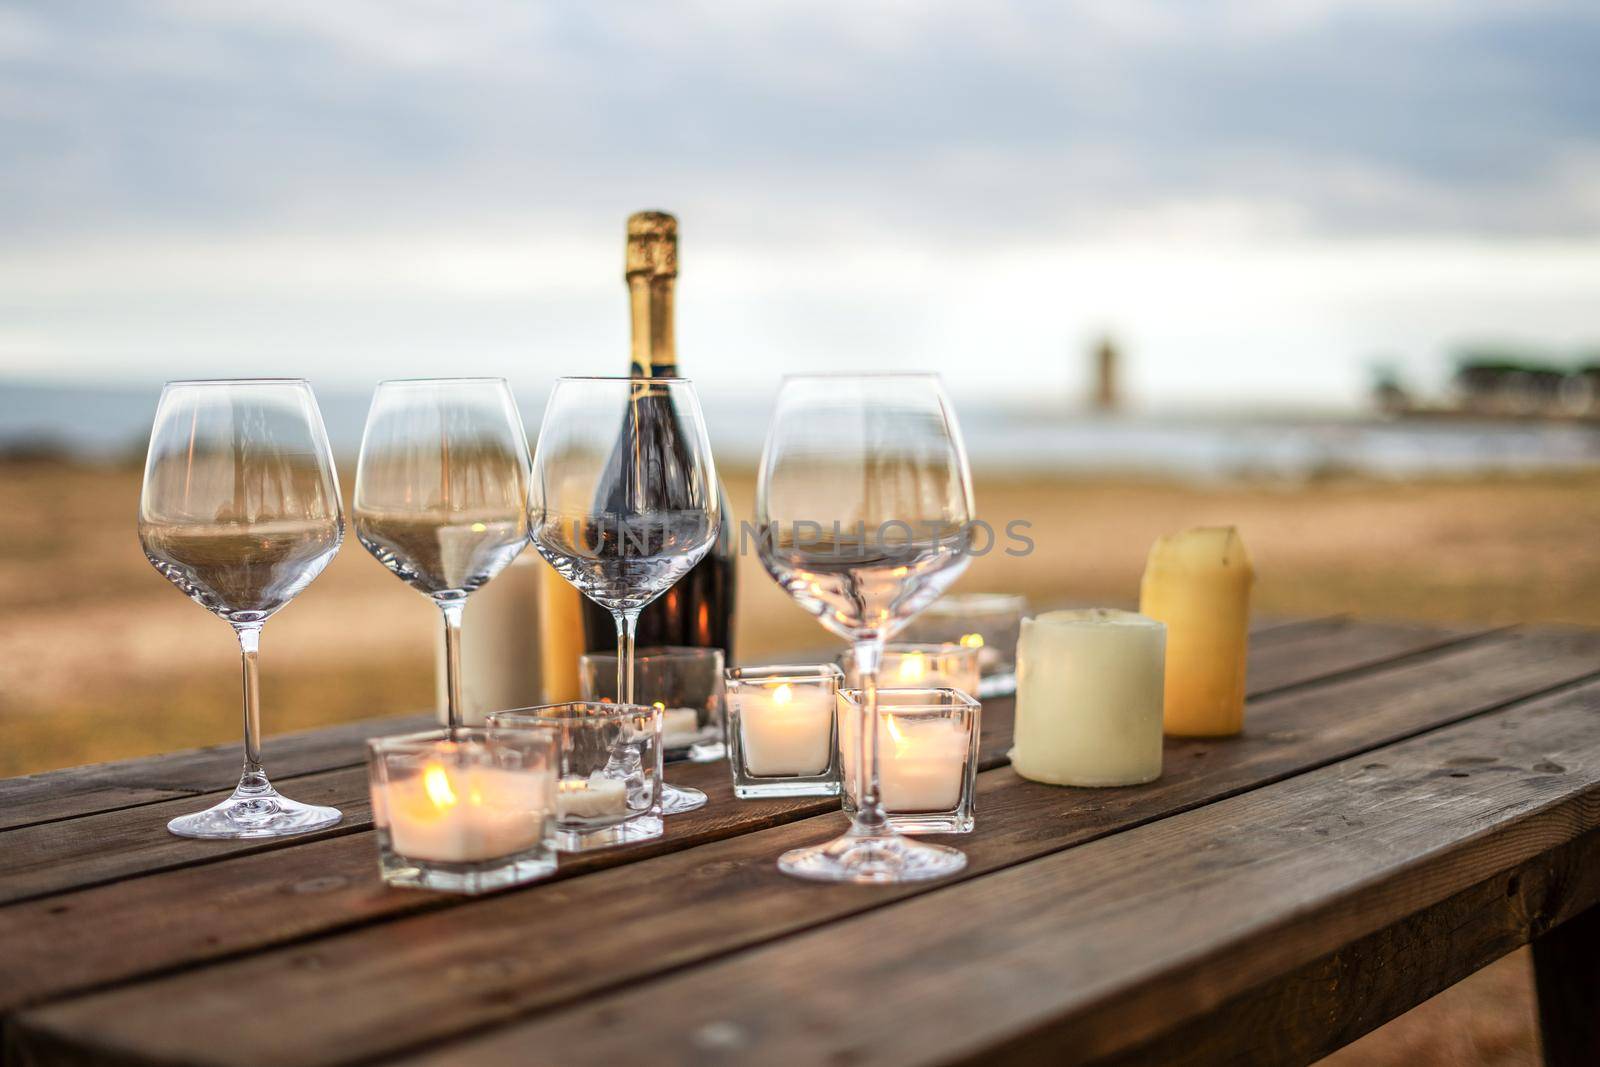 All is ready for the end of year toast in winter holidays by the sea - Celebration scene with selective focus on empty glasses, closed champagne bottle, and candles on a wooden table of outdoor bar